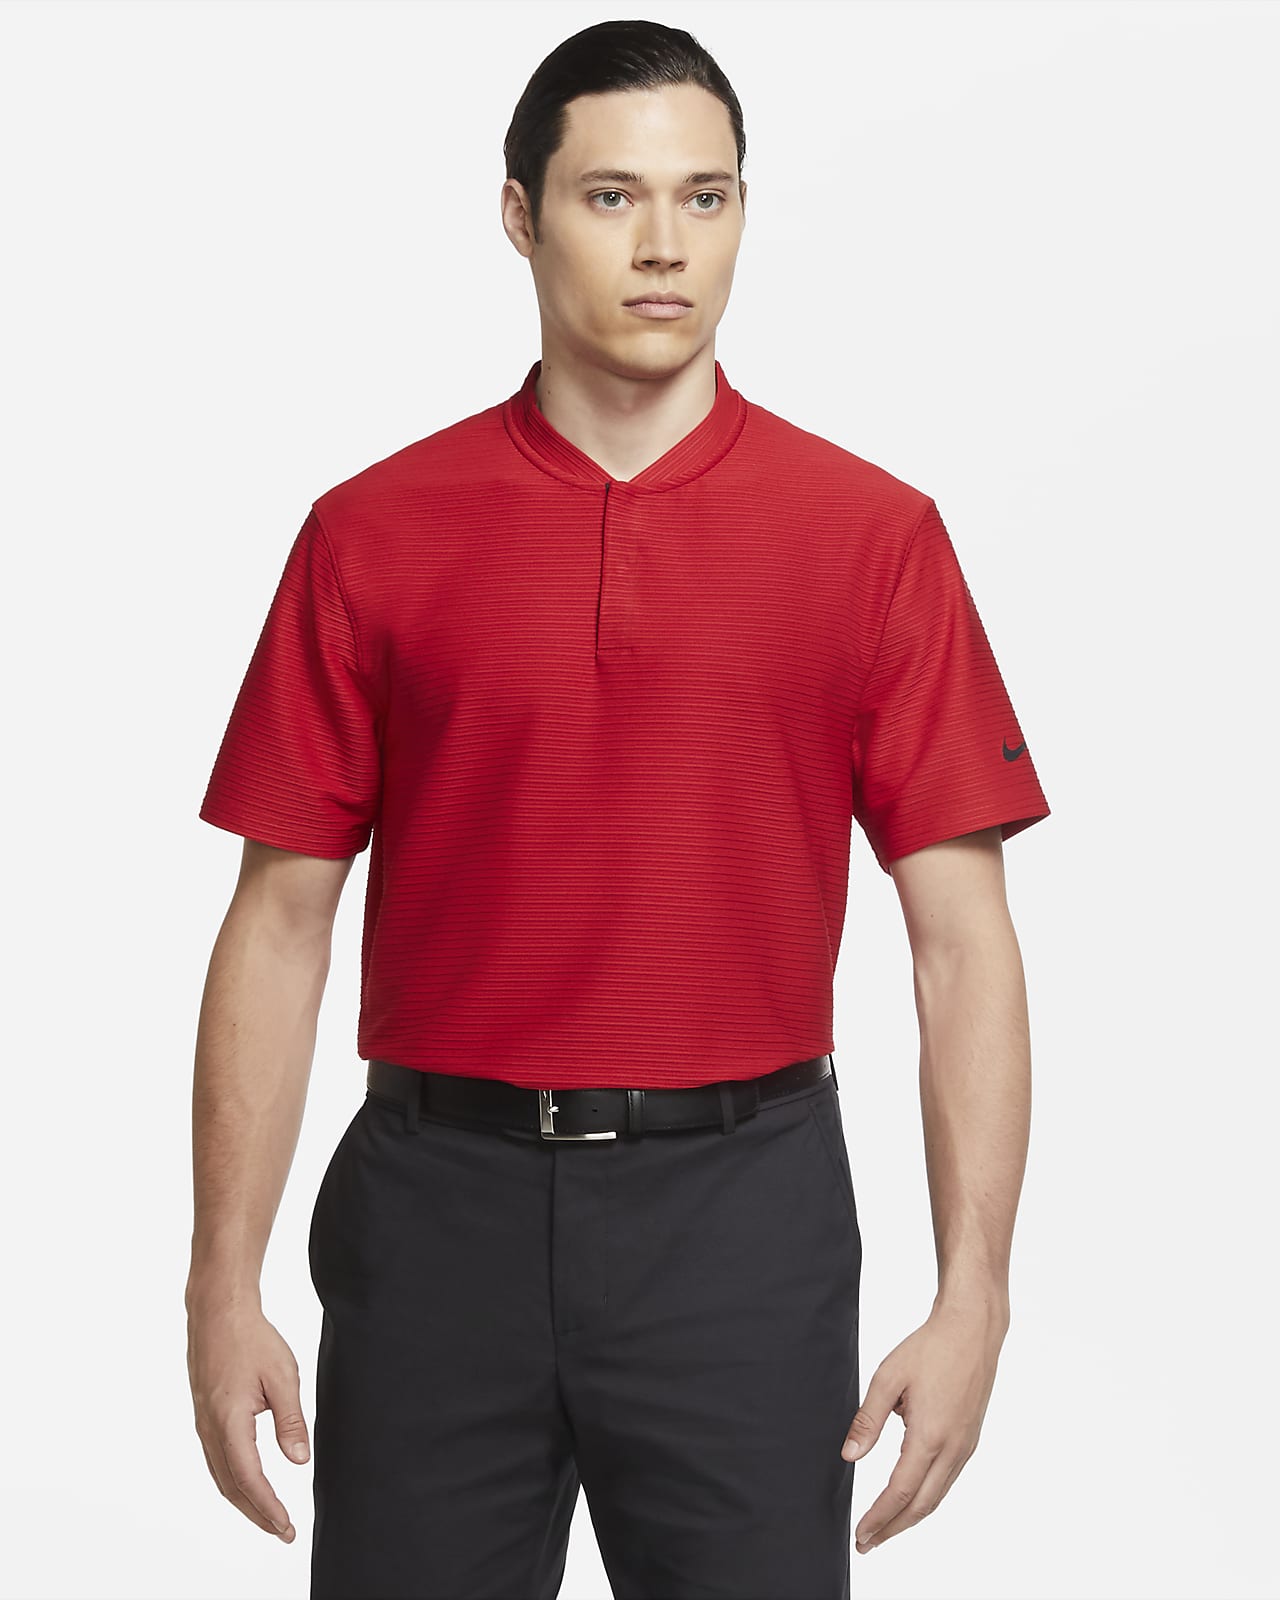 tiger woods red nike polo